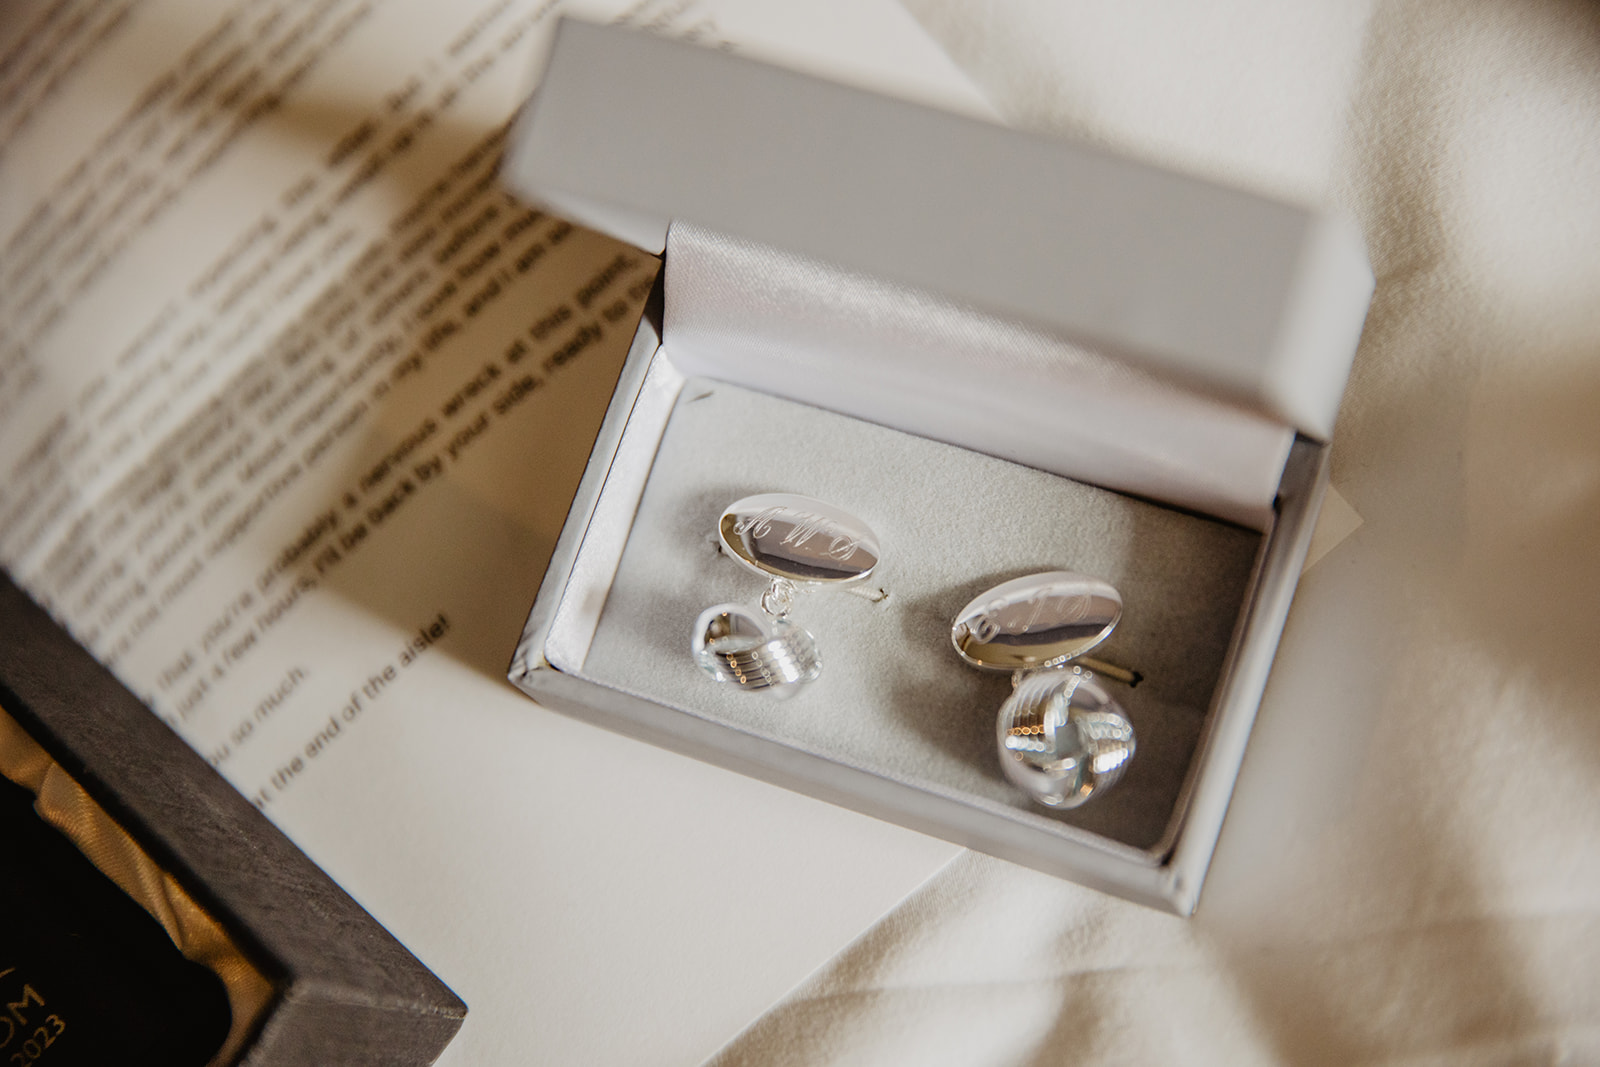 Bride's earrings at a Bury Manor Barn Wedding in Sussex. Photographer OliveJoy Photography.